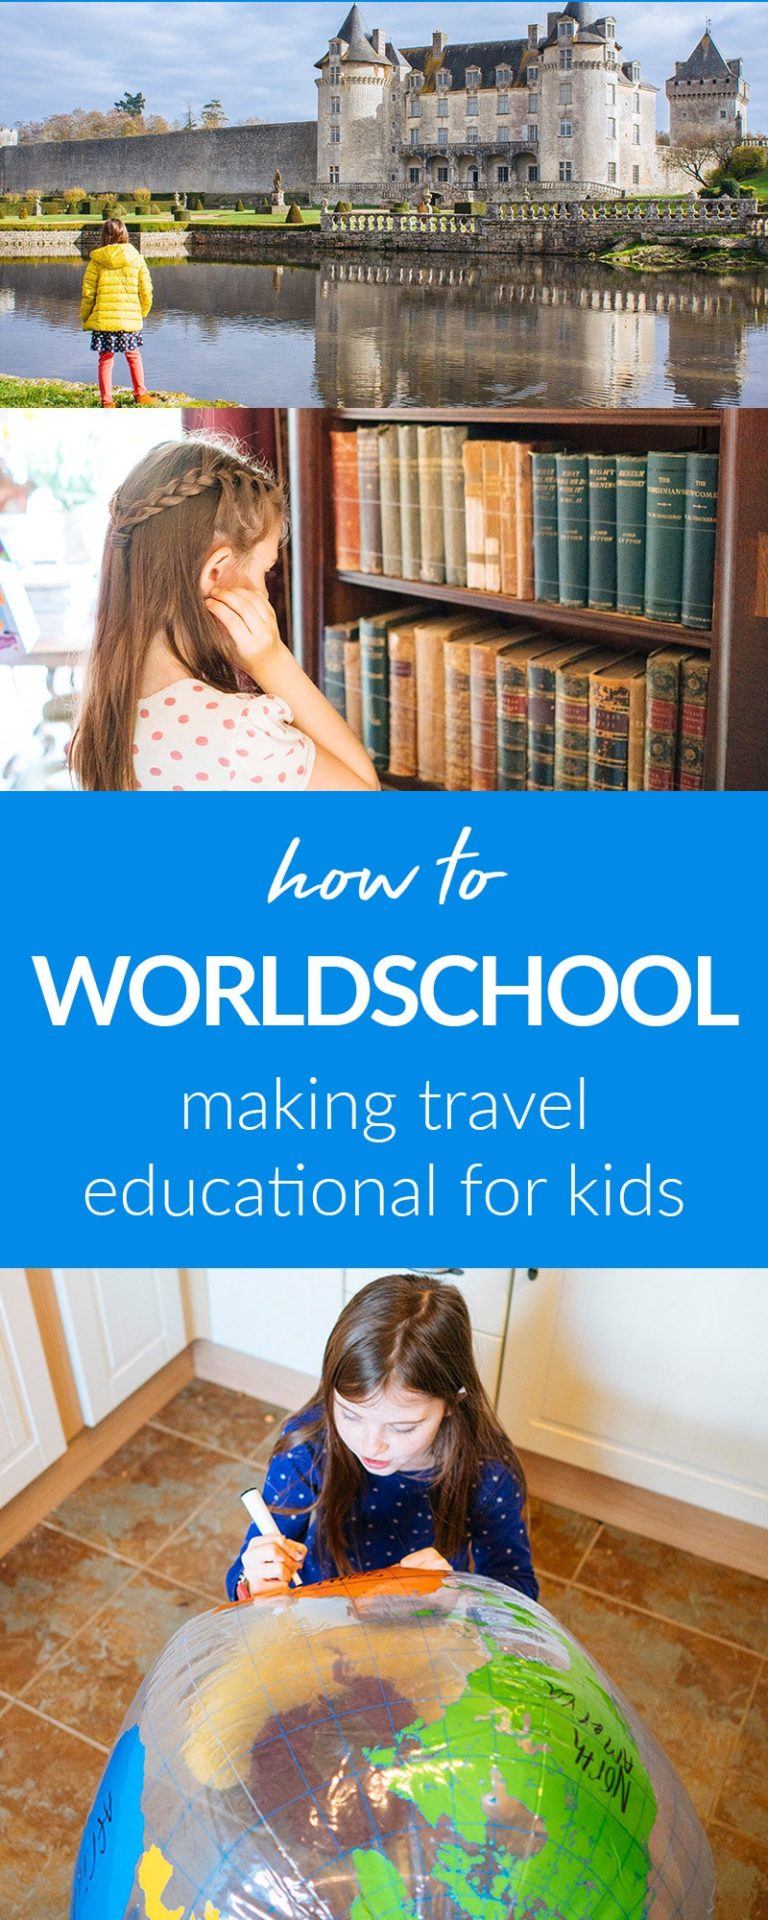 How to Worldschool: Making travel educational for kids